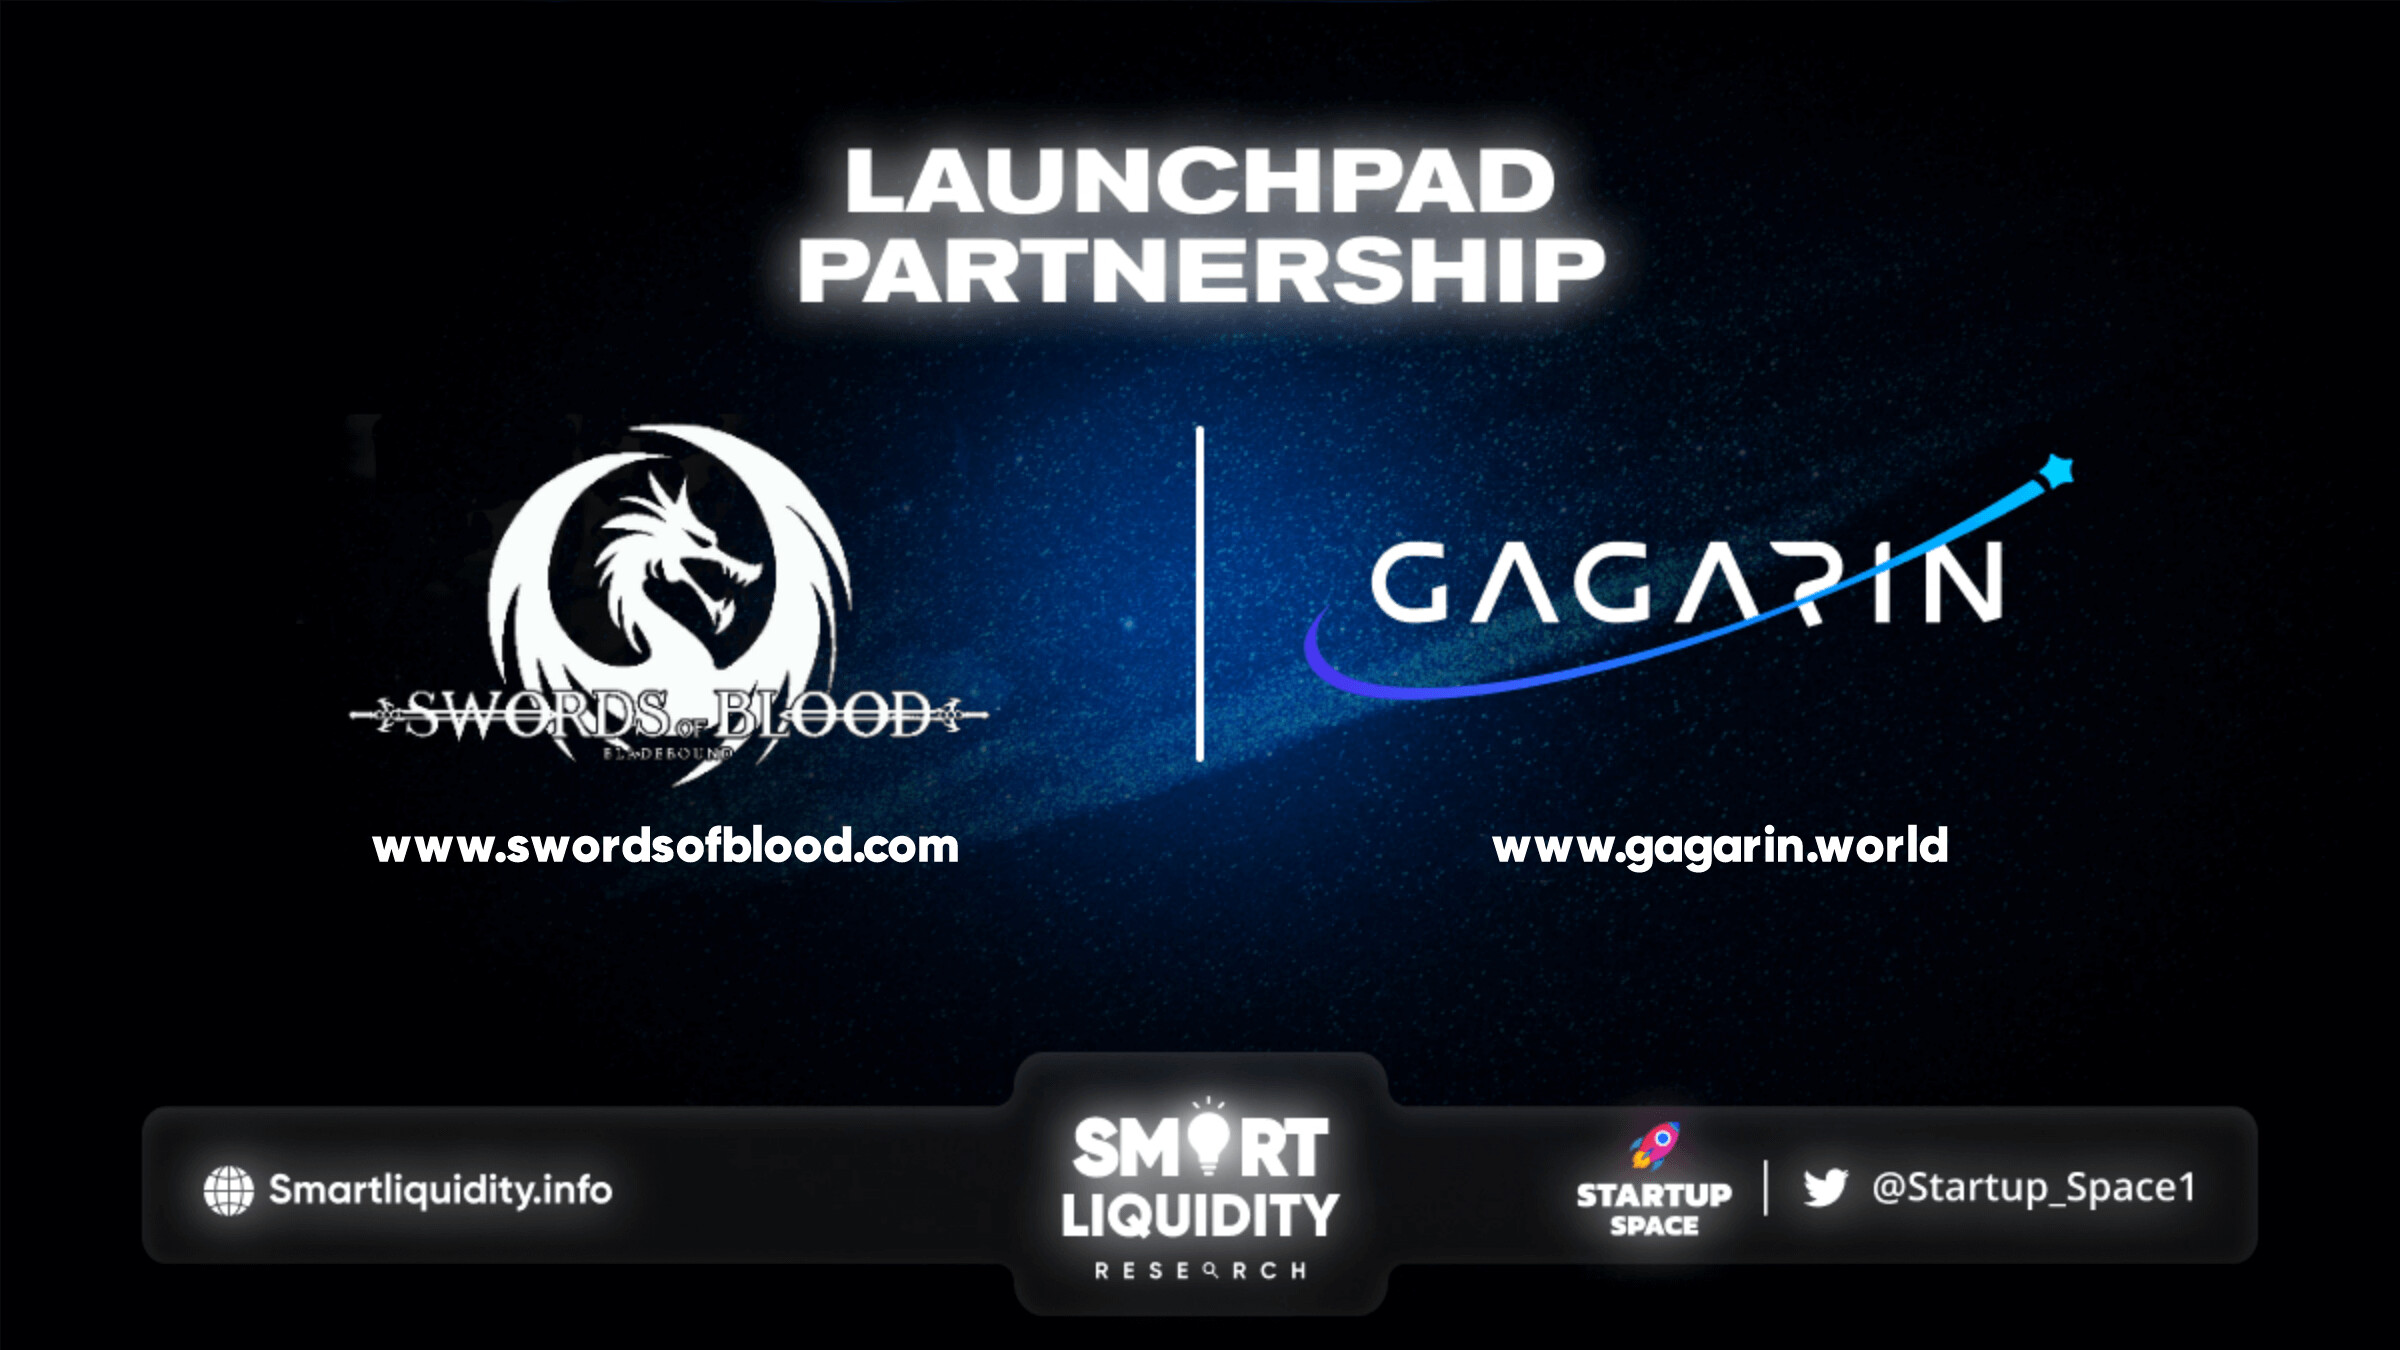 GAGARIN Launchpad Partnership with Swords Of Blood